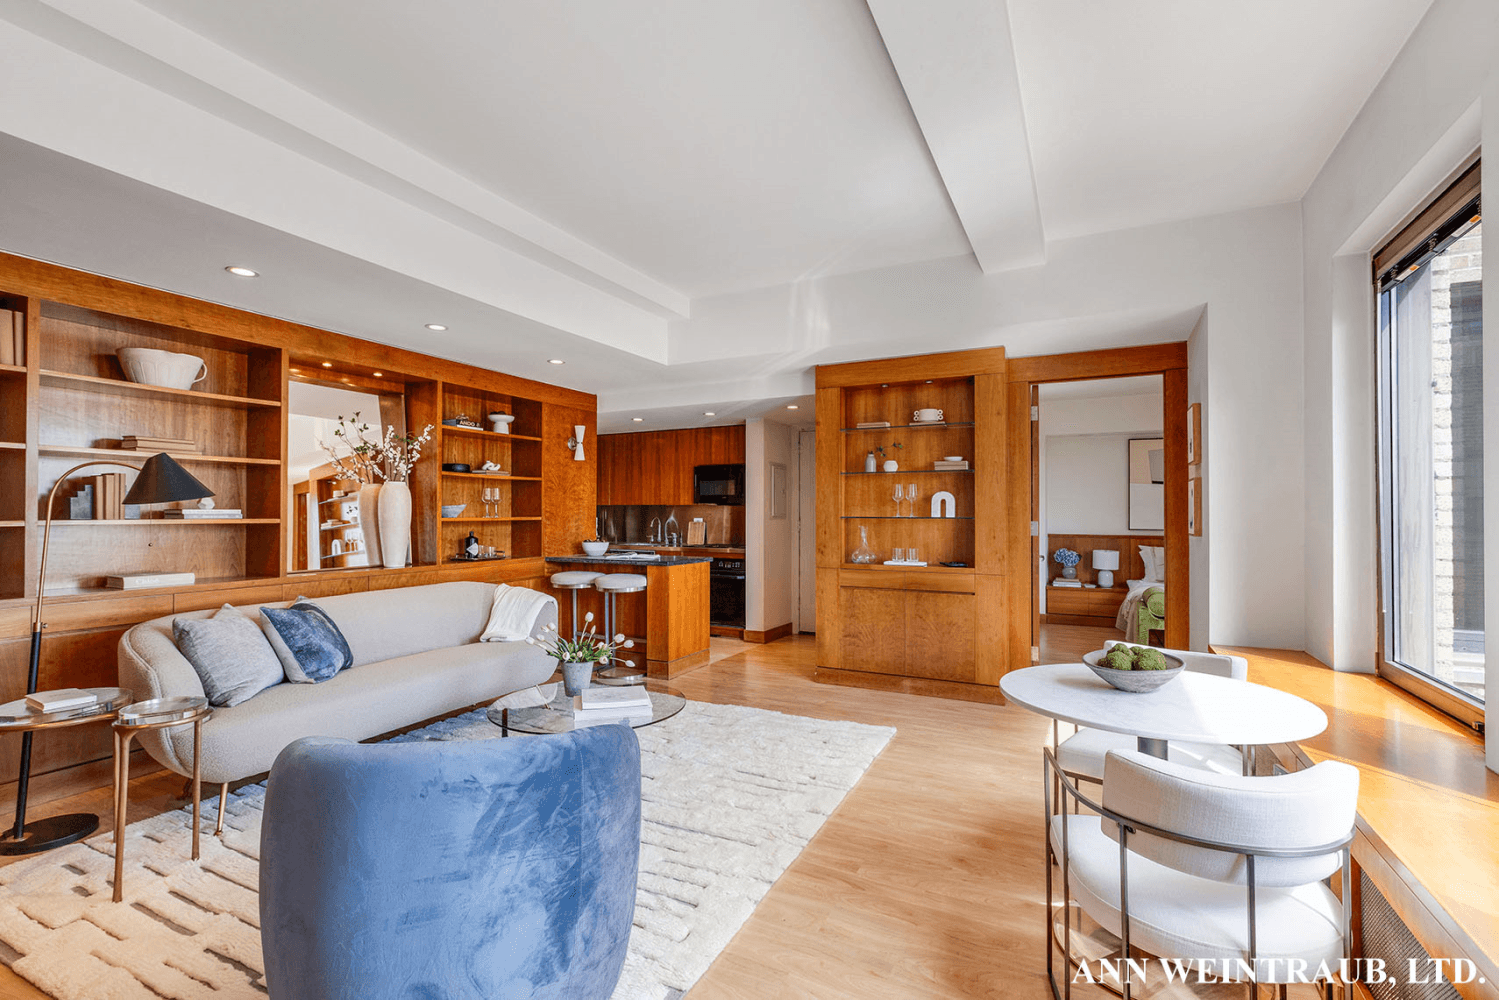 Price negotiable. Way up high, in the fabled Tower of One Fifth Avenue, sits a totally renovated two bedroom and two full bathroom apartment.